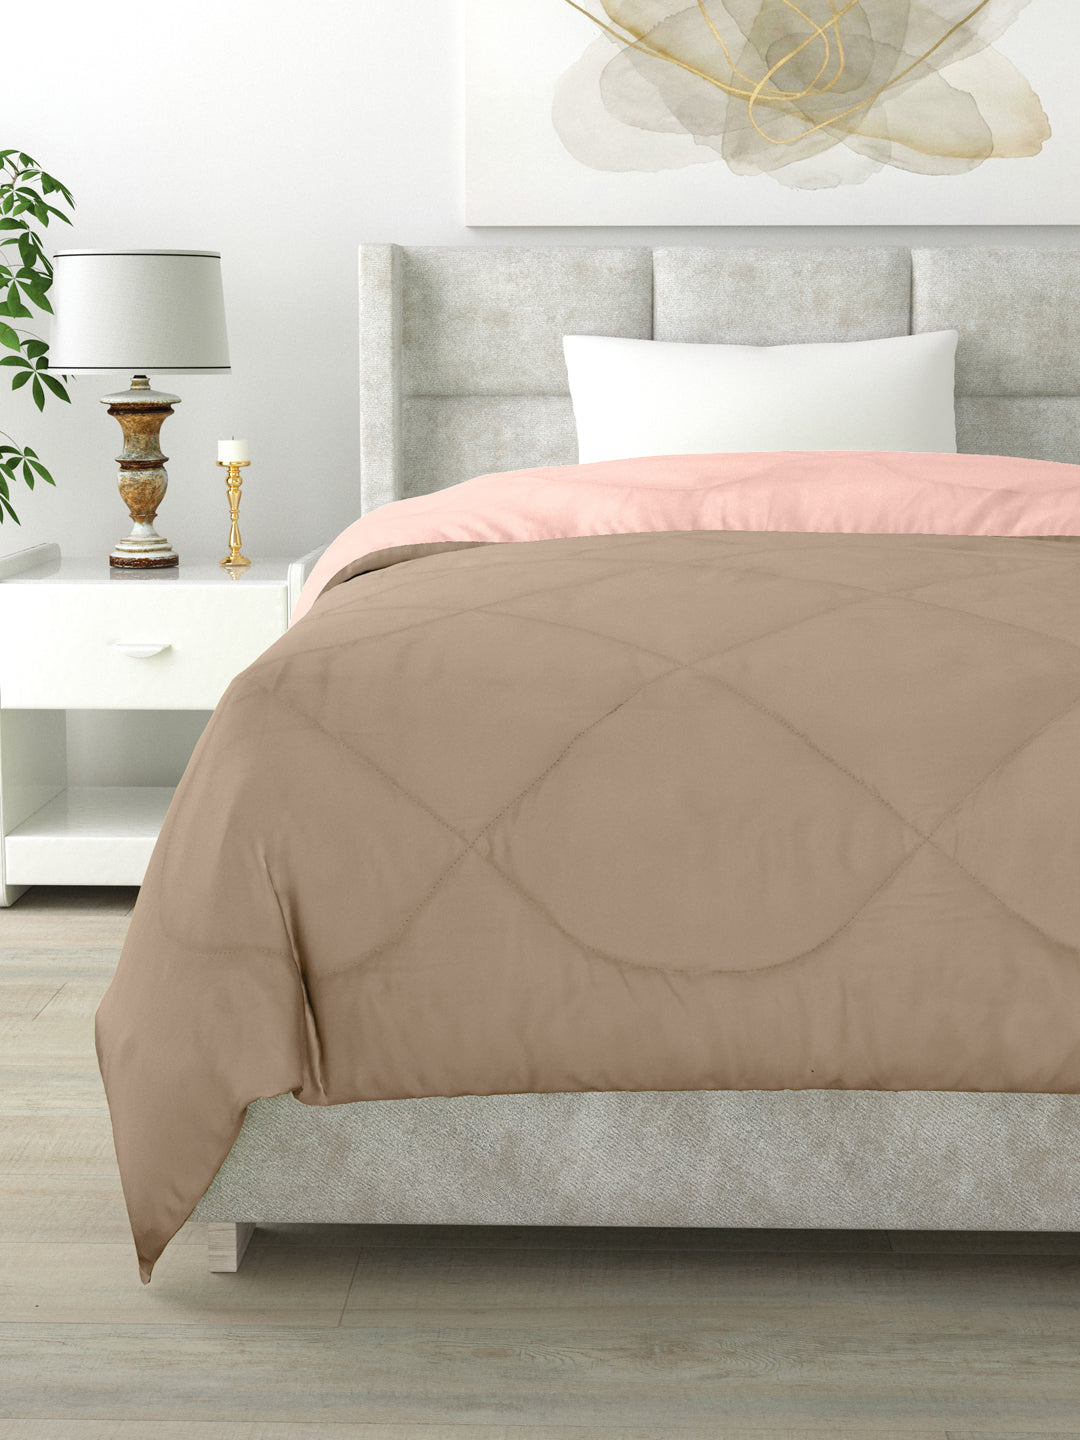 Reversible Single Bed Comforter 200 GSM 60x90 Inches (Peach & Taupe)